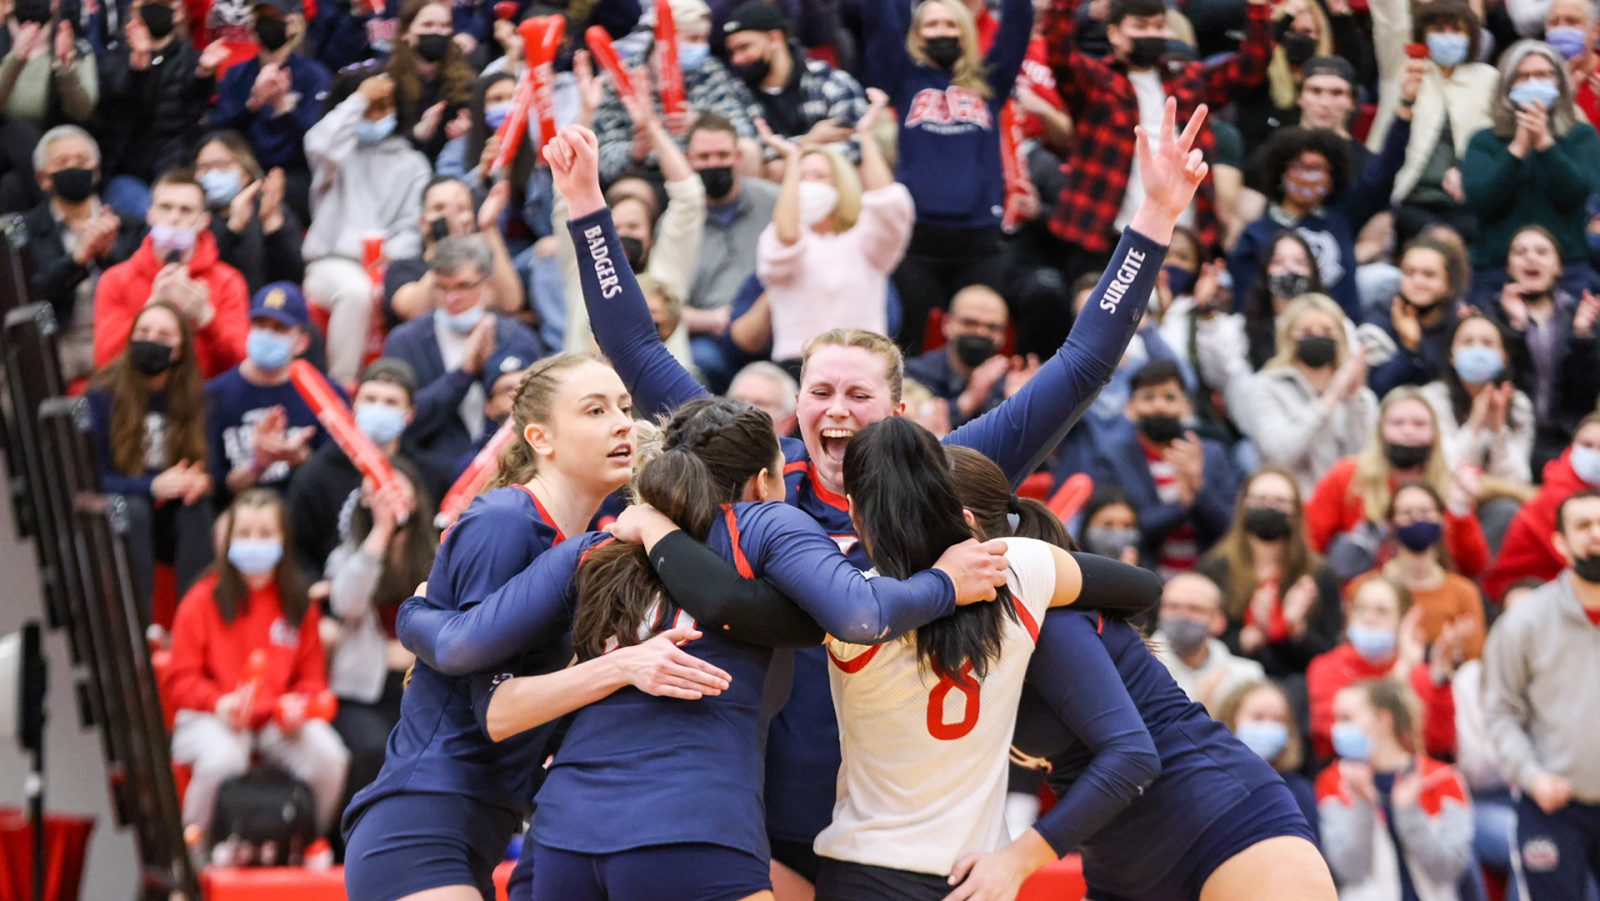 Women’s volleyball players celebrate in front of a crowd-filled gym.